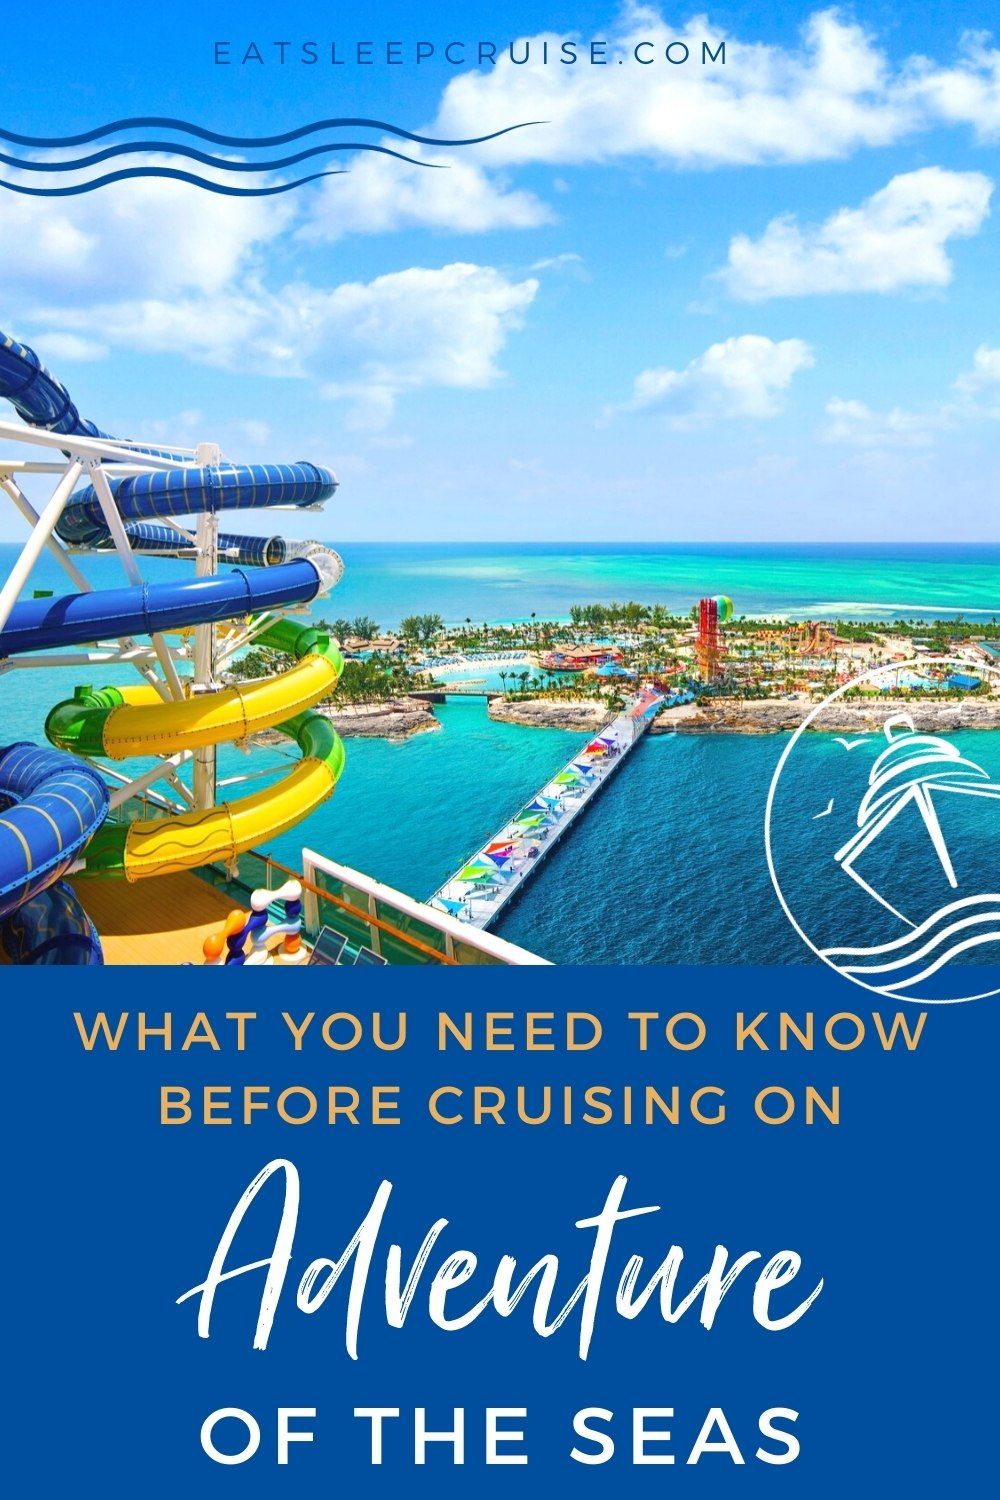 What You Need to Know Before Cruising on Adventure of the Seas